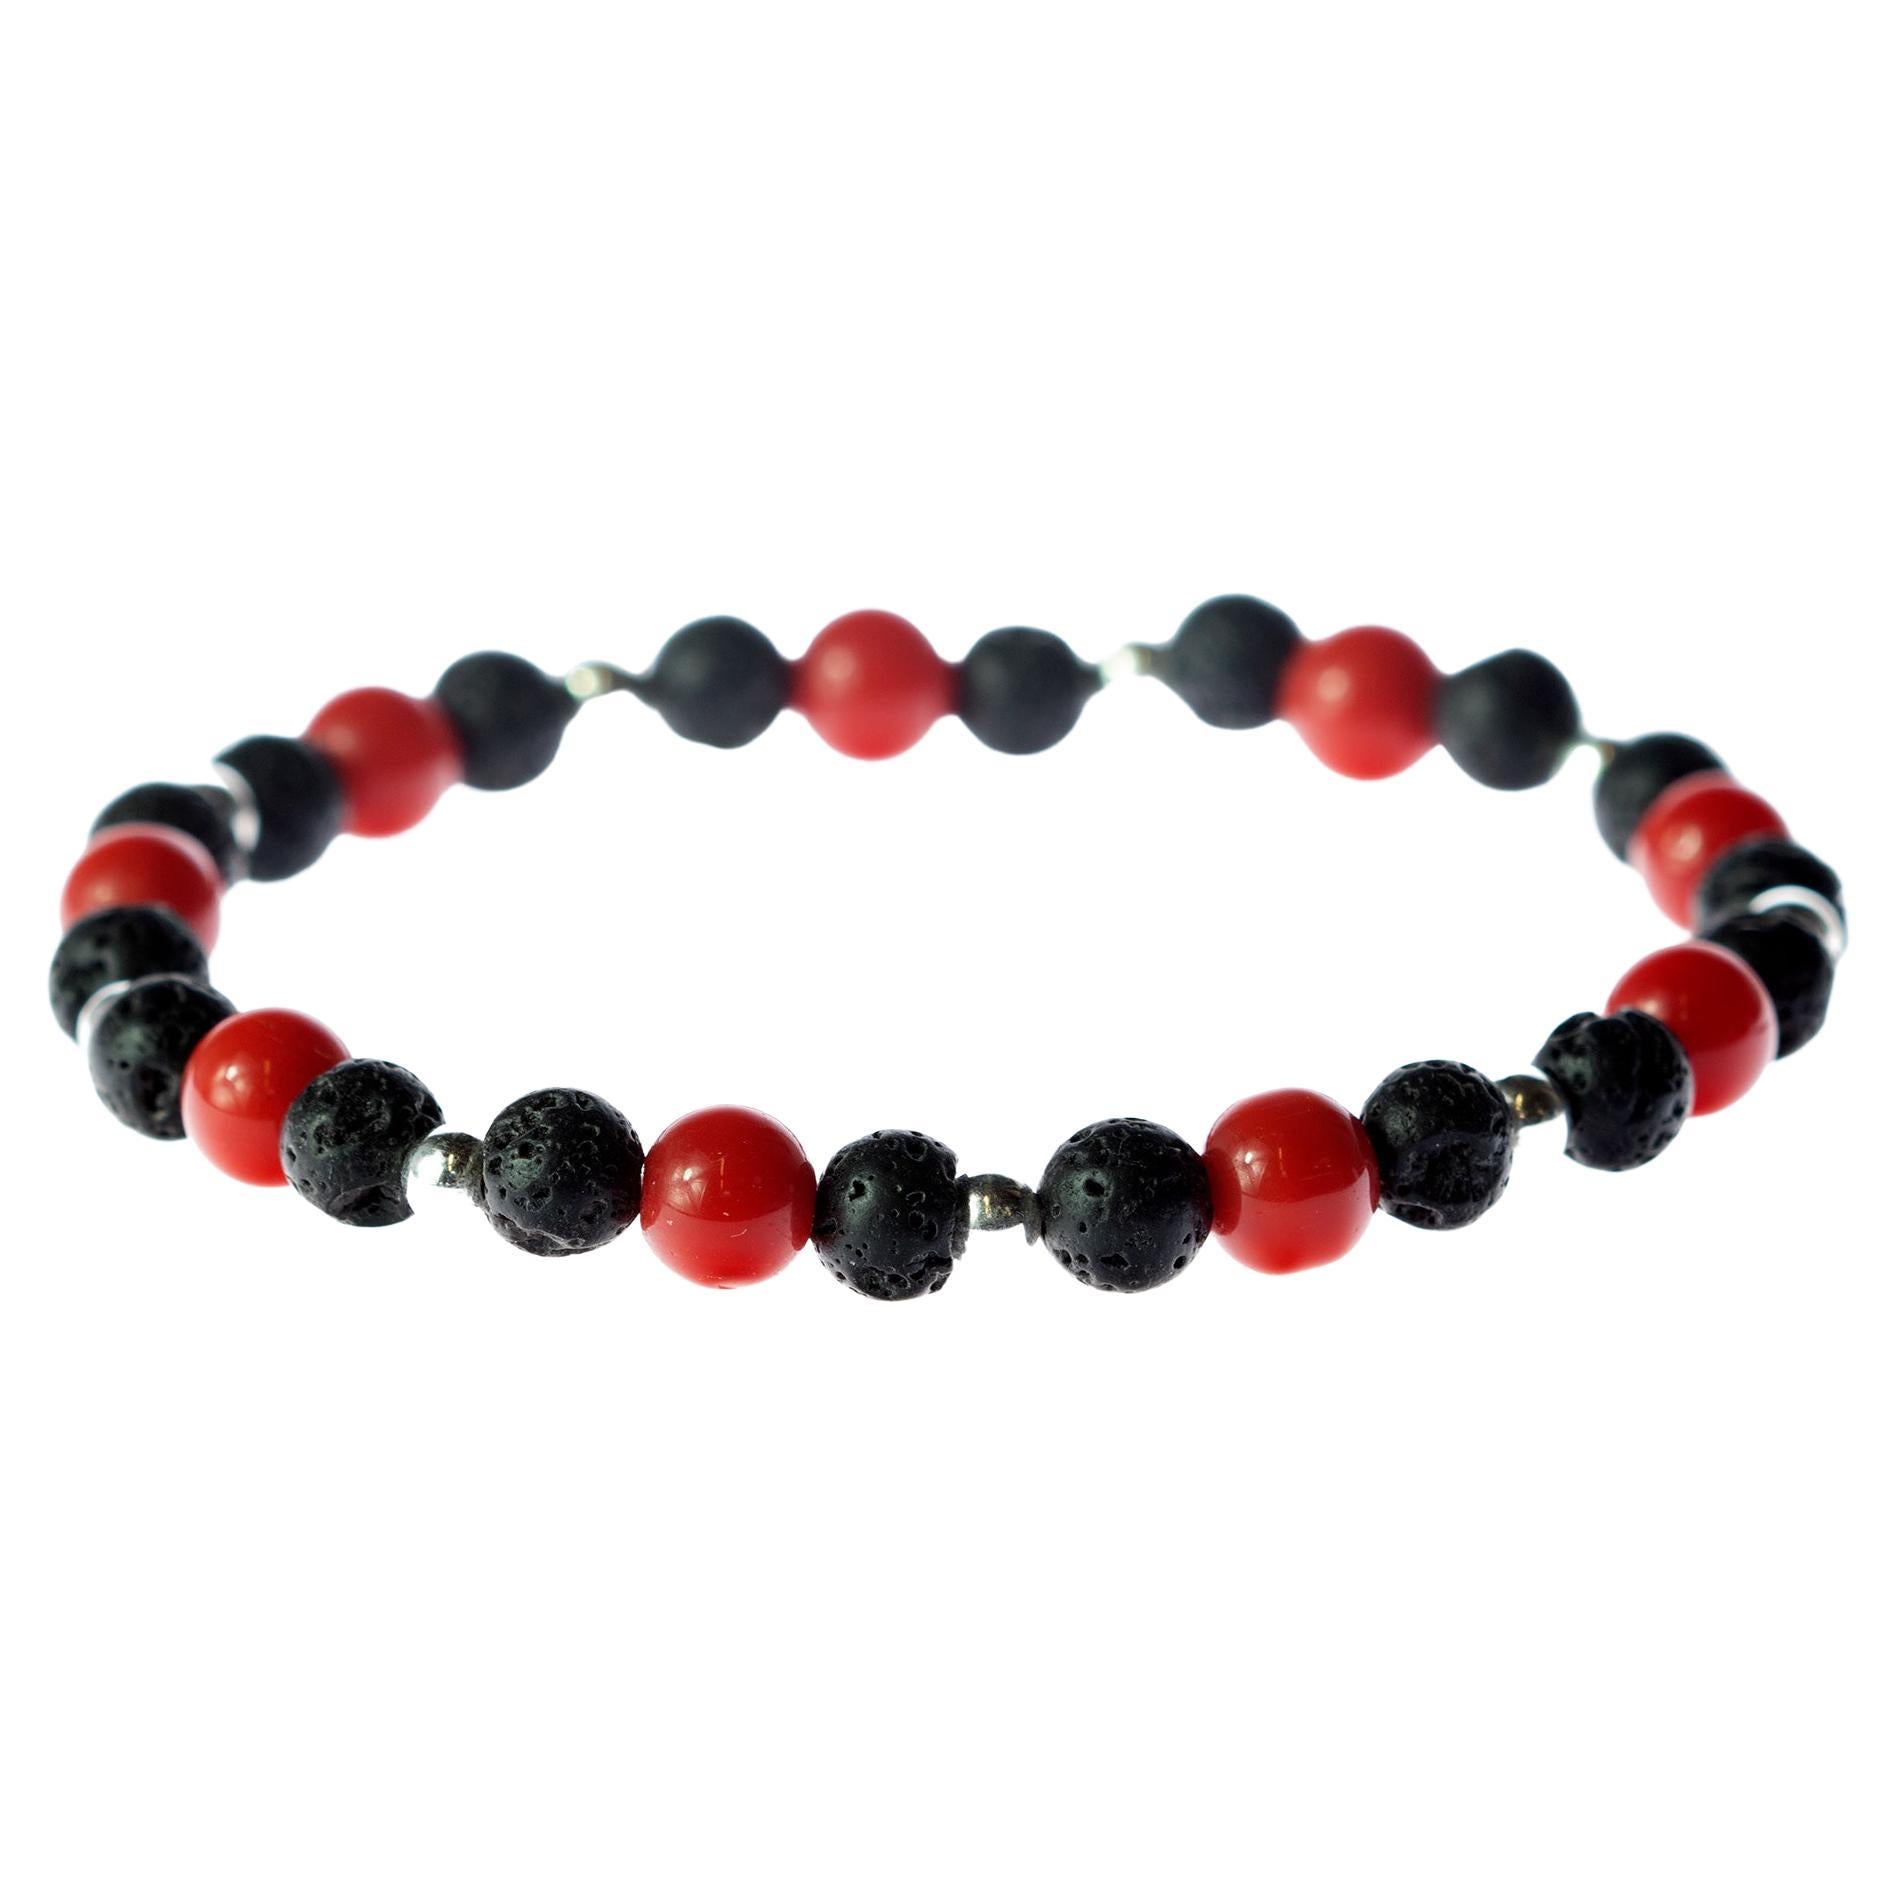 Bamboo Coral Silver Lava Stone Stretch Bracelet Men Jewelry Gift for Him For Sale